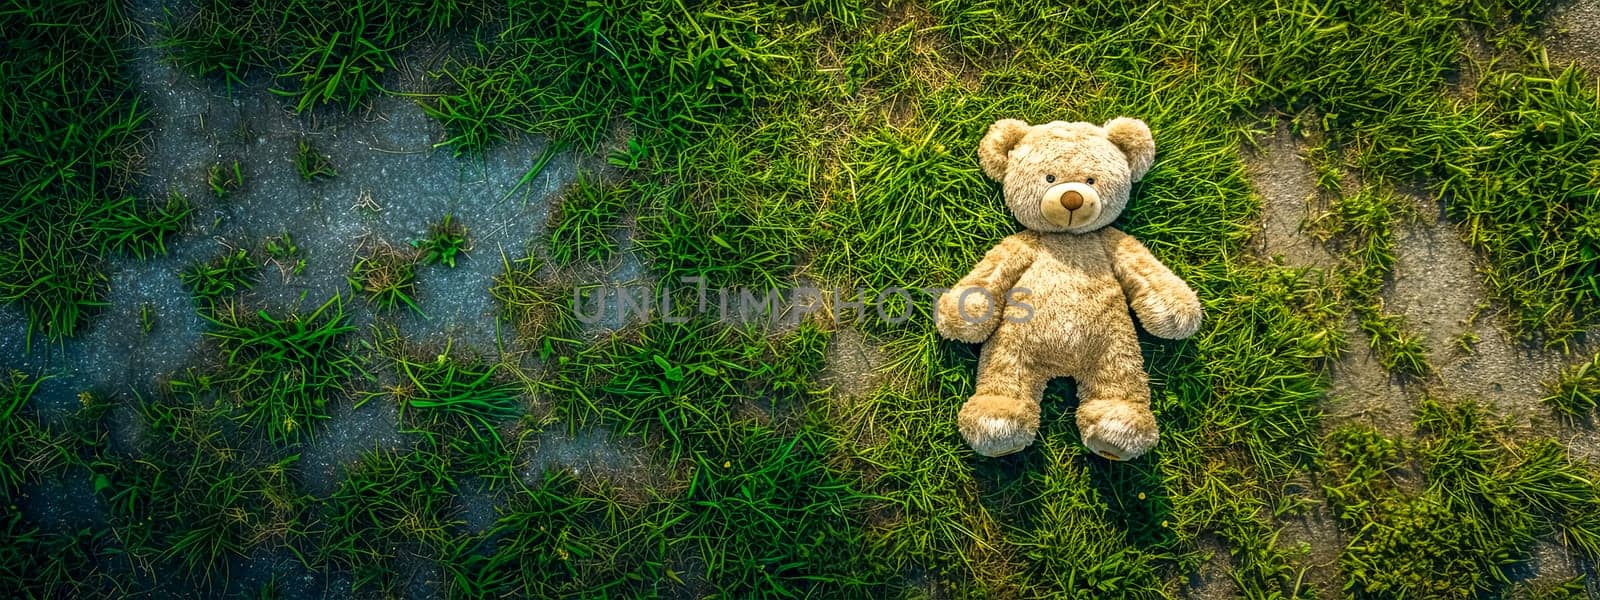 Aerial view of a teddy bear on a grassy path, creating a soft, heartwarming scene. by Edophoto